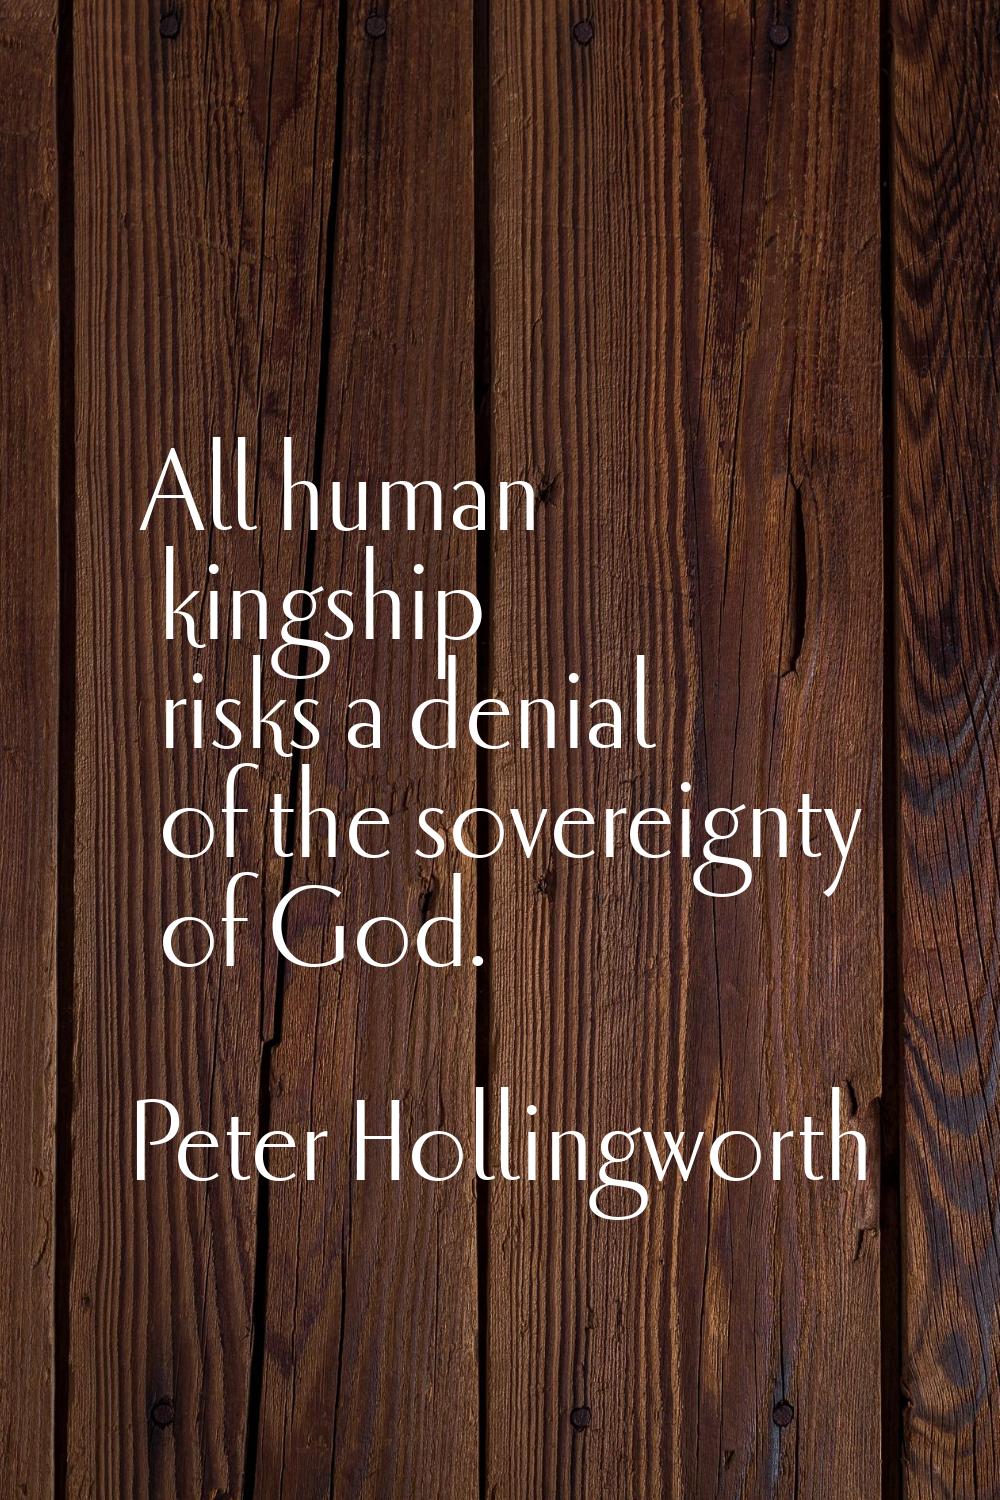 All human kingship risks a denial of the sovereignty of God.